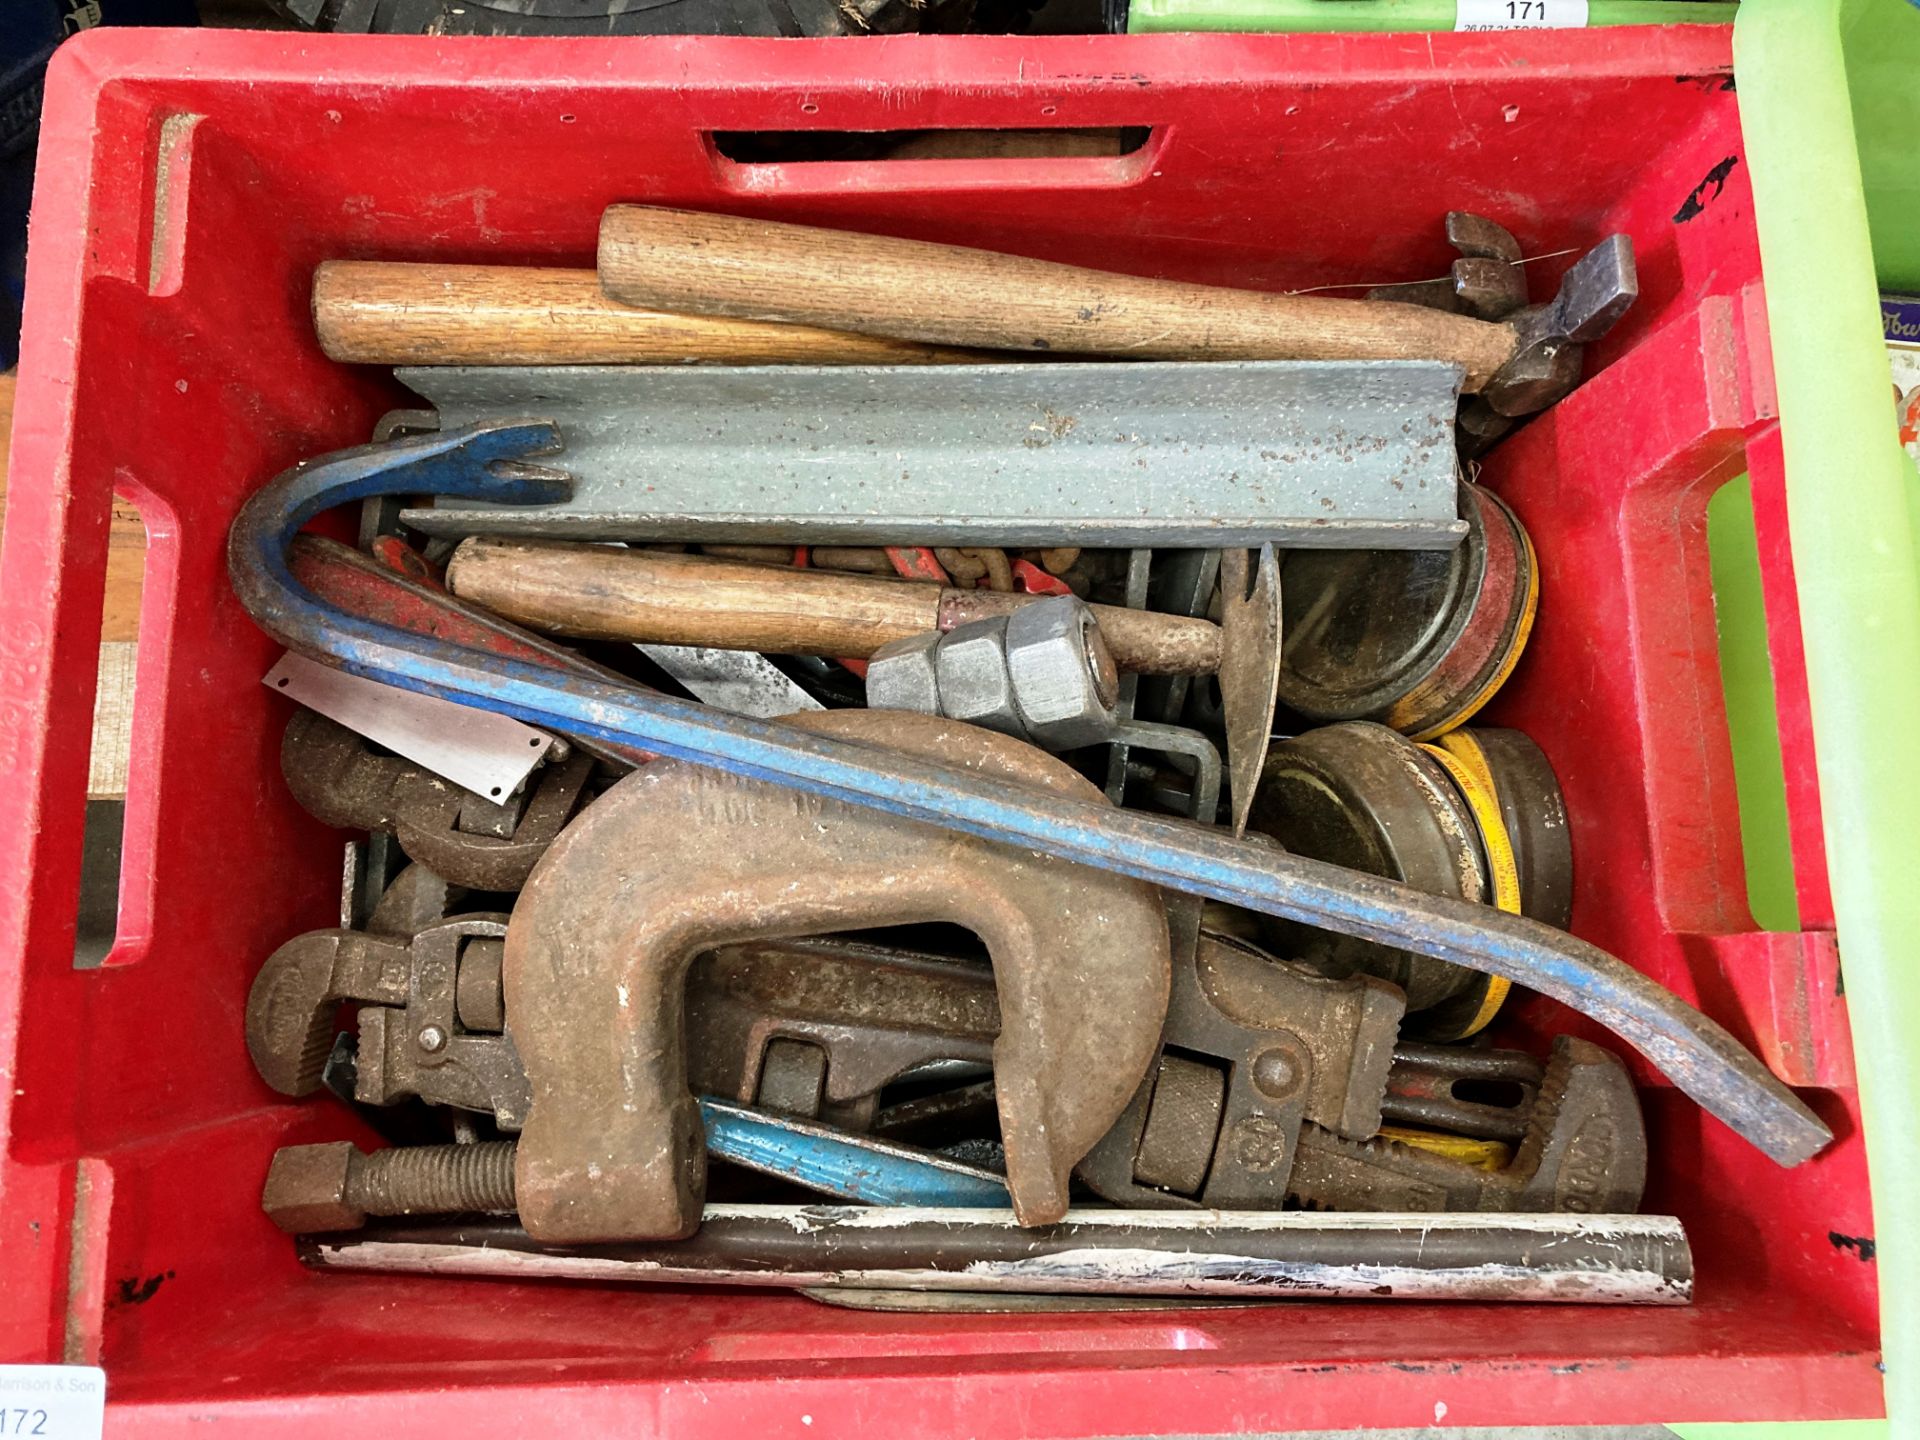 Red plastic box and contents - hammers, stillsons, jemmy,